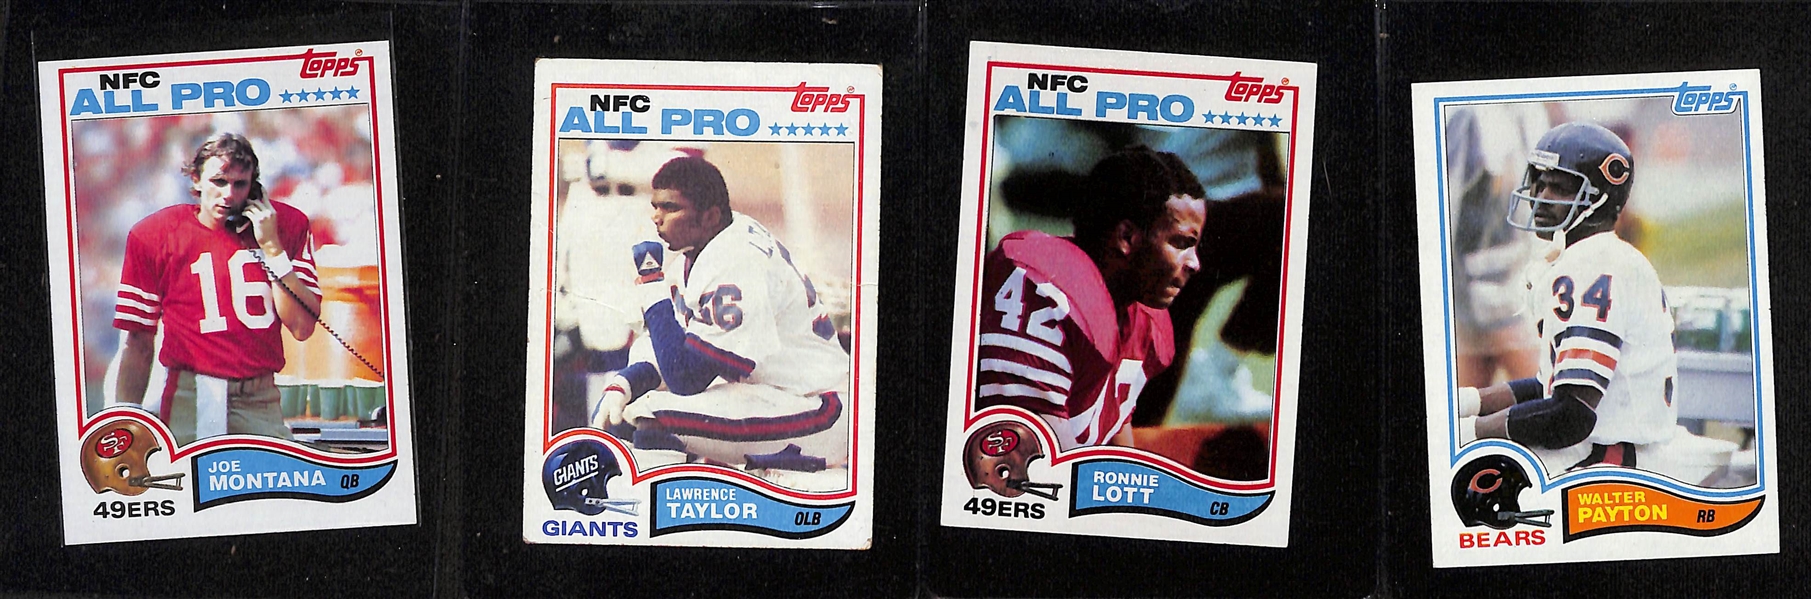 1982 Topps Football Complete Set of 528 Cards w. Lawrence Taylor (cr) & Ronnie Lott Rookies